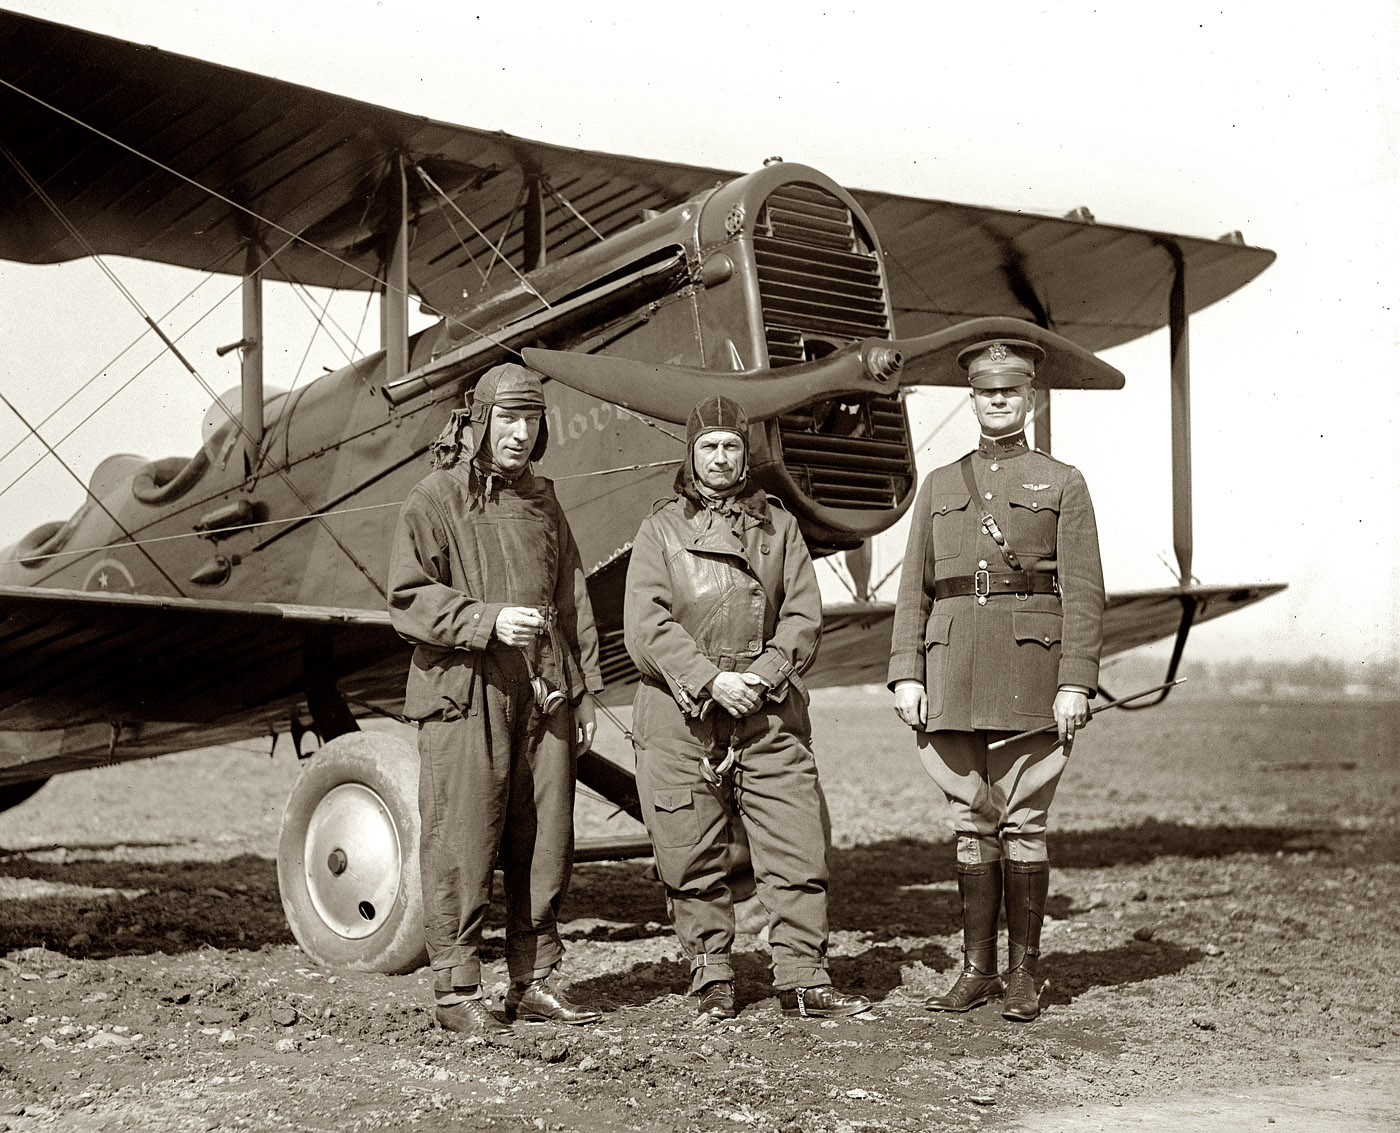 Feb. 20, 1925. Rep. P.B. O' Sullivan, Gen. Billy Mitchell and Maj. Henry B. Clagett with biplane ("Plover") at Bolling Field. View full size. National Photo Co.